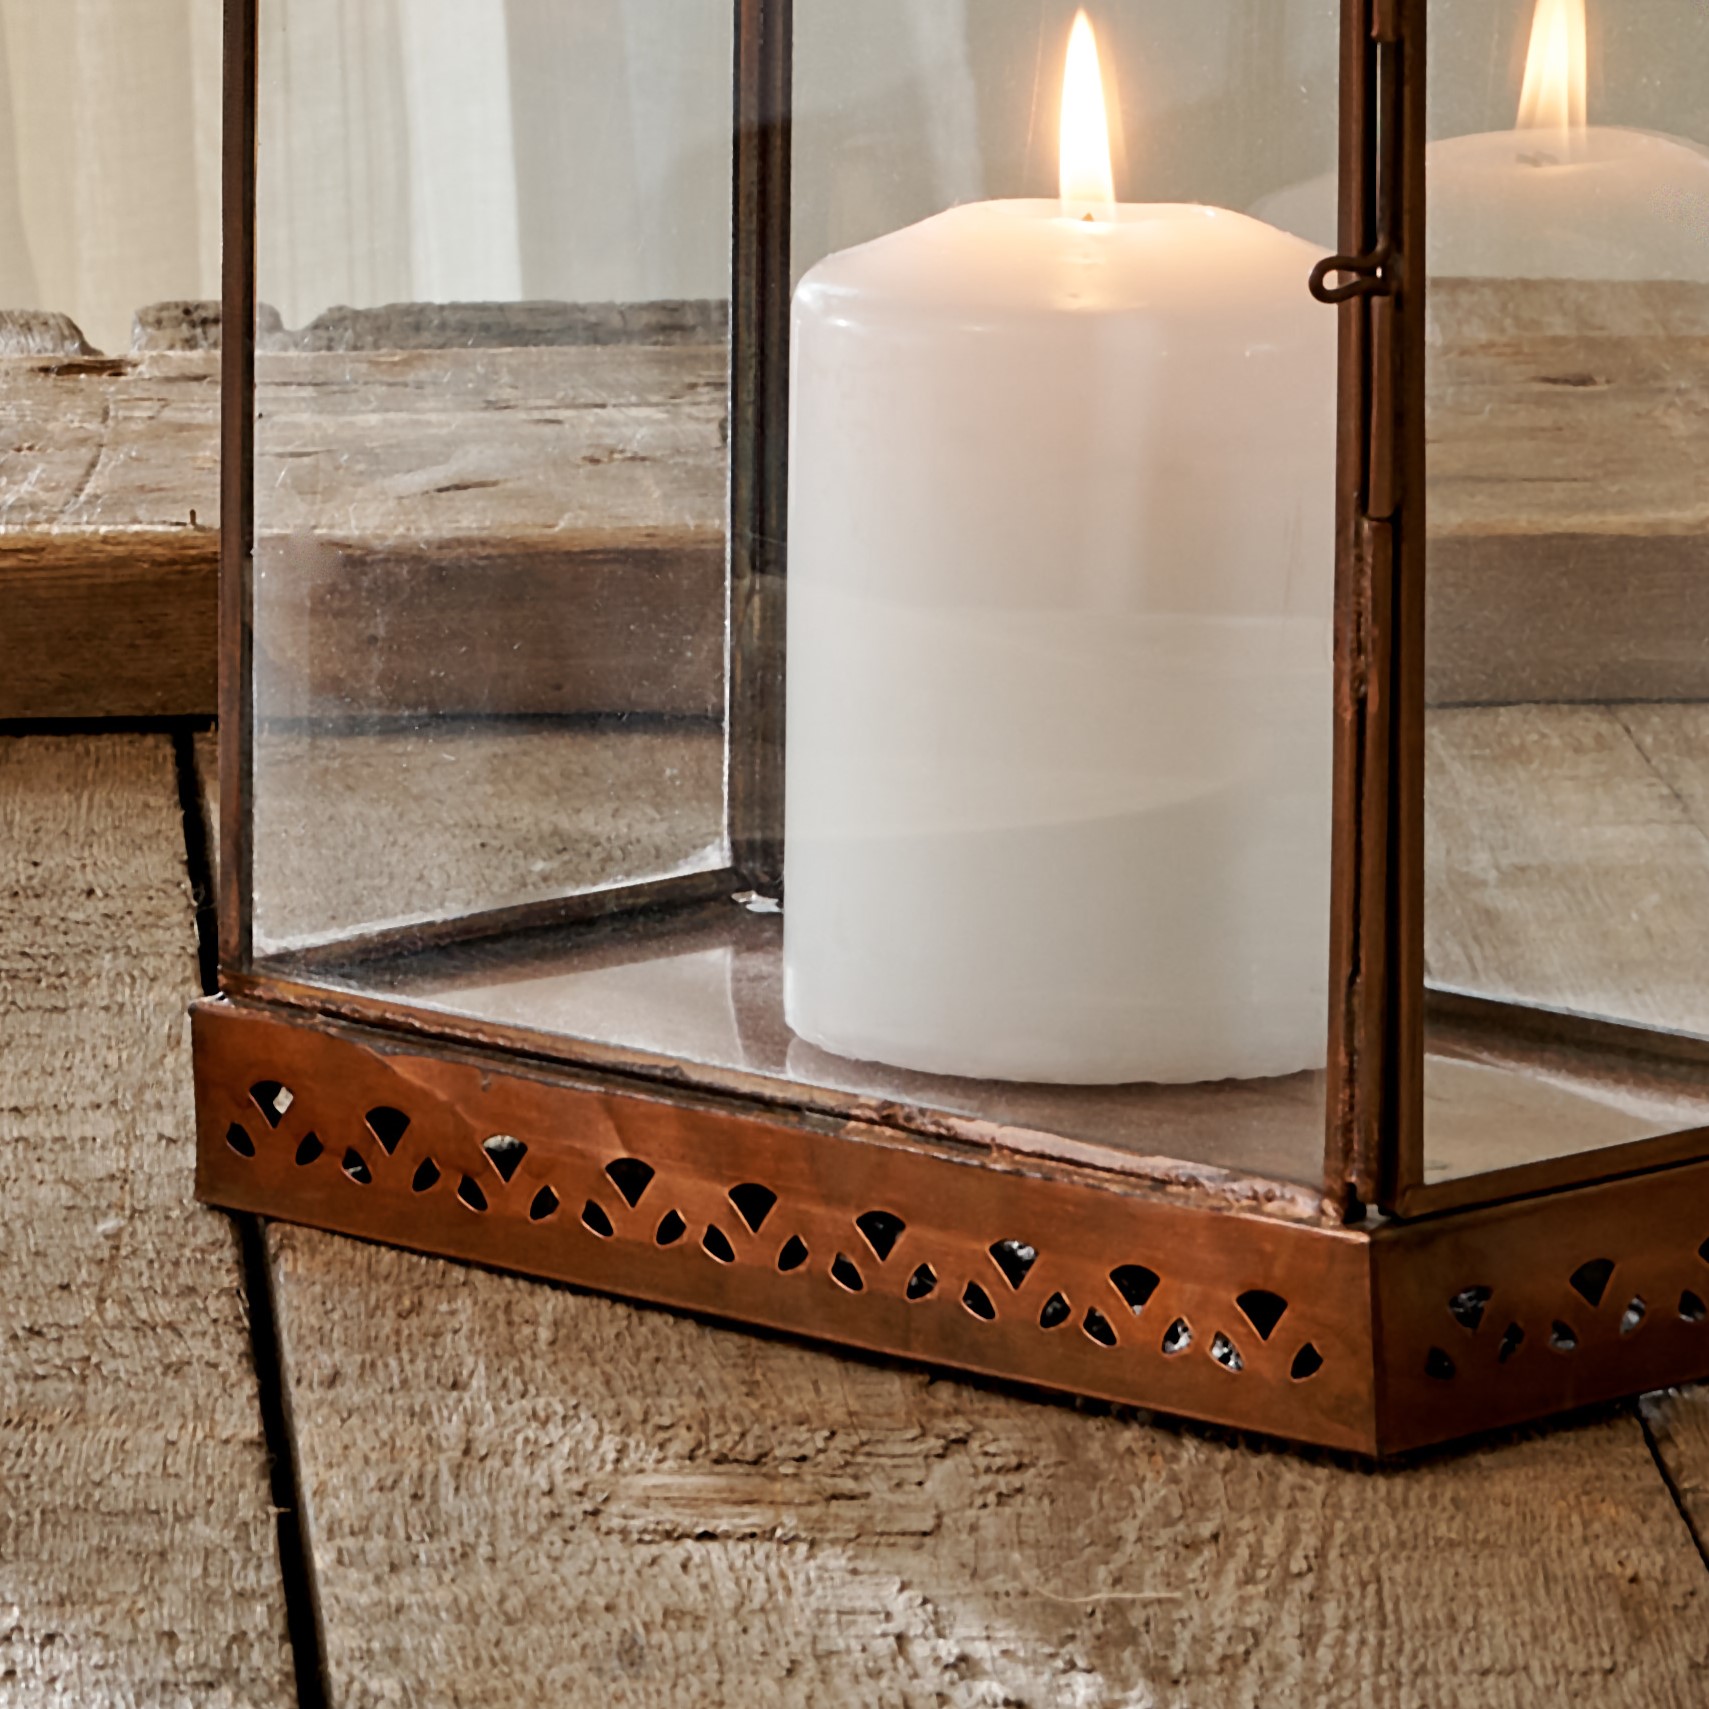 Close up of base of antique brass lantern on wooden table, with white pillar candle